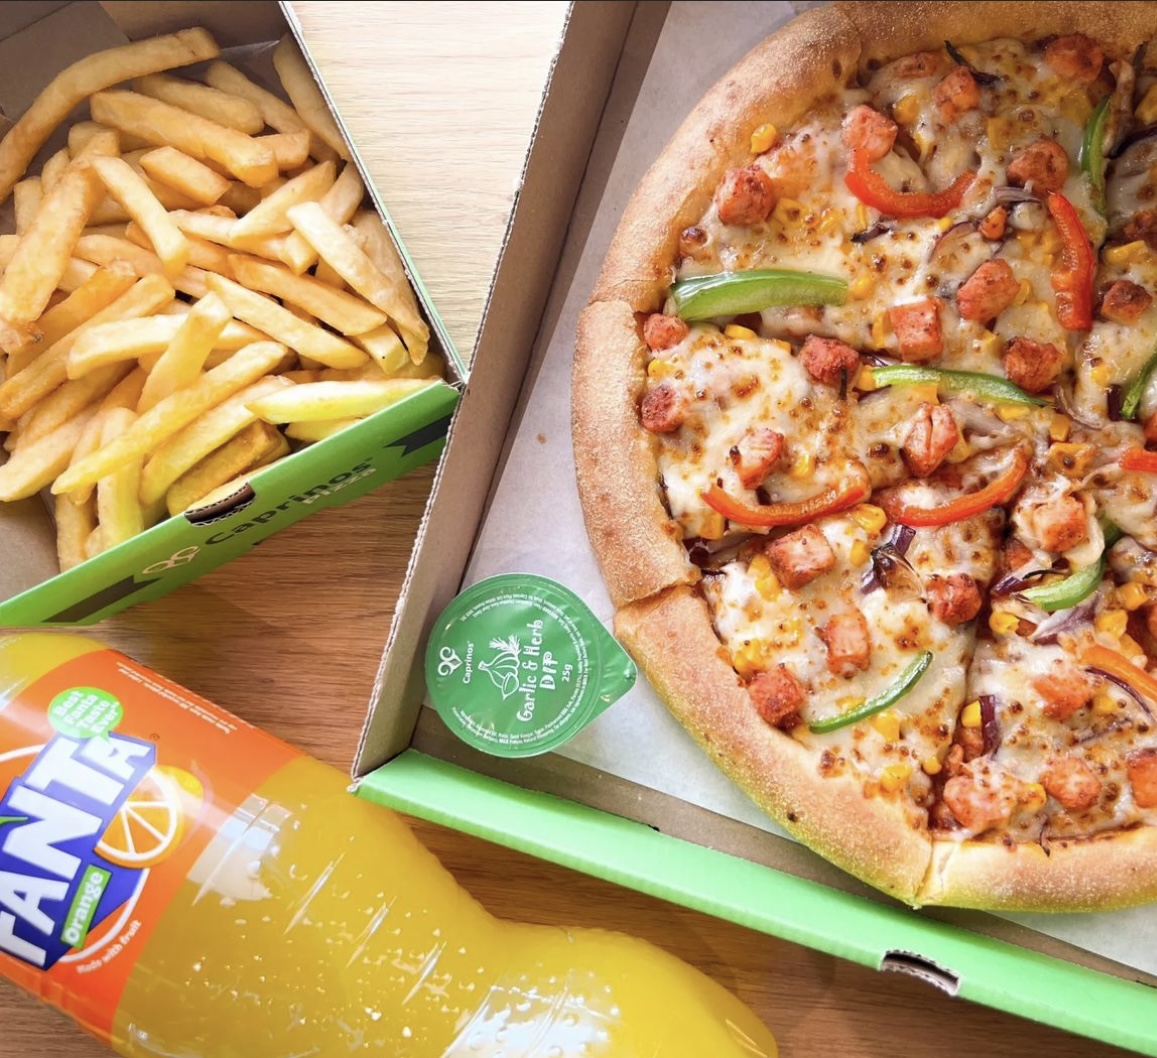 Fancy a Friday night in? 🍕 🎬 

Indulge in @caprinospizza pizza perfection offer 🤤 you get a medium pizza, a tasty side and a refreshing drink of your choice all for £17.99 💥 

#winsfordcross #cheshire #foodie #caprinos #pizzatime #caprinospizza